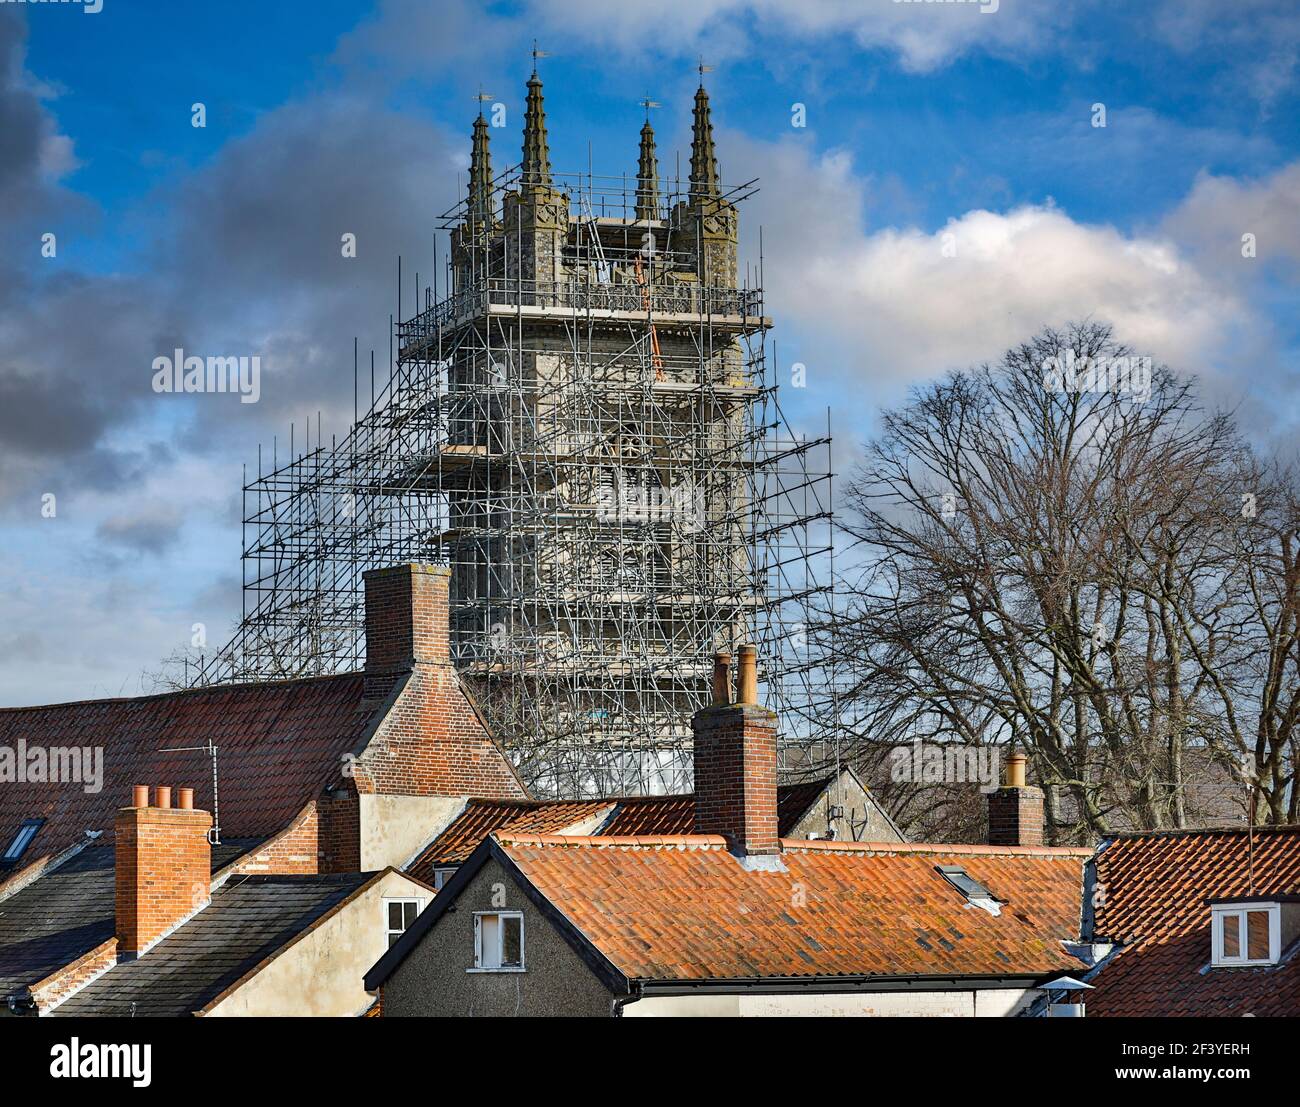 St Marys church tower and scaffolding. Stock Photo